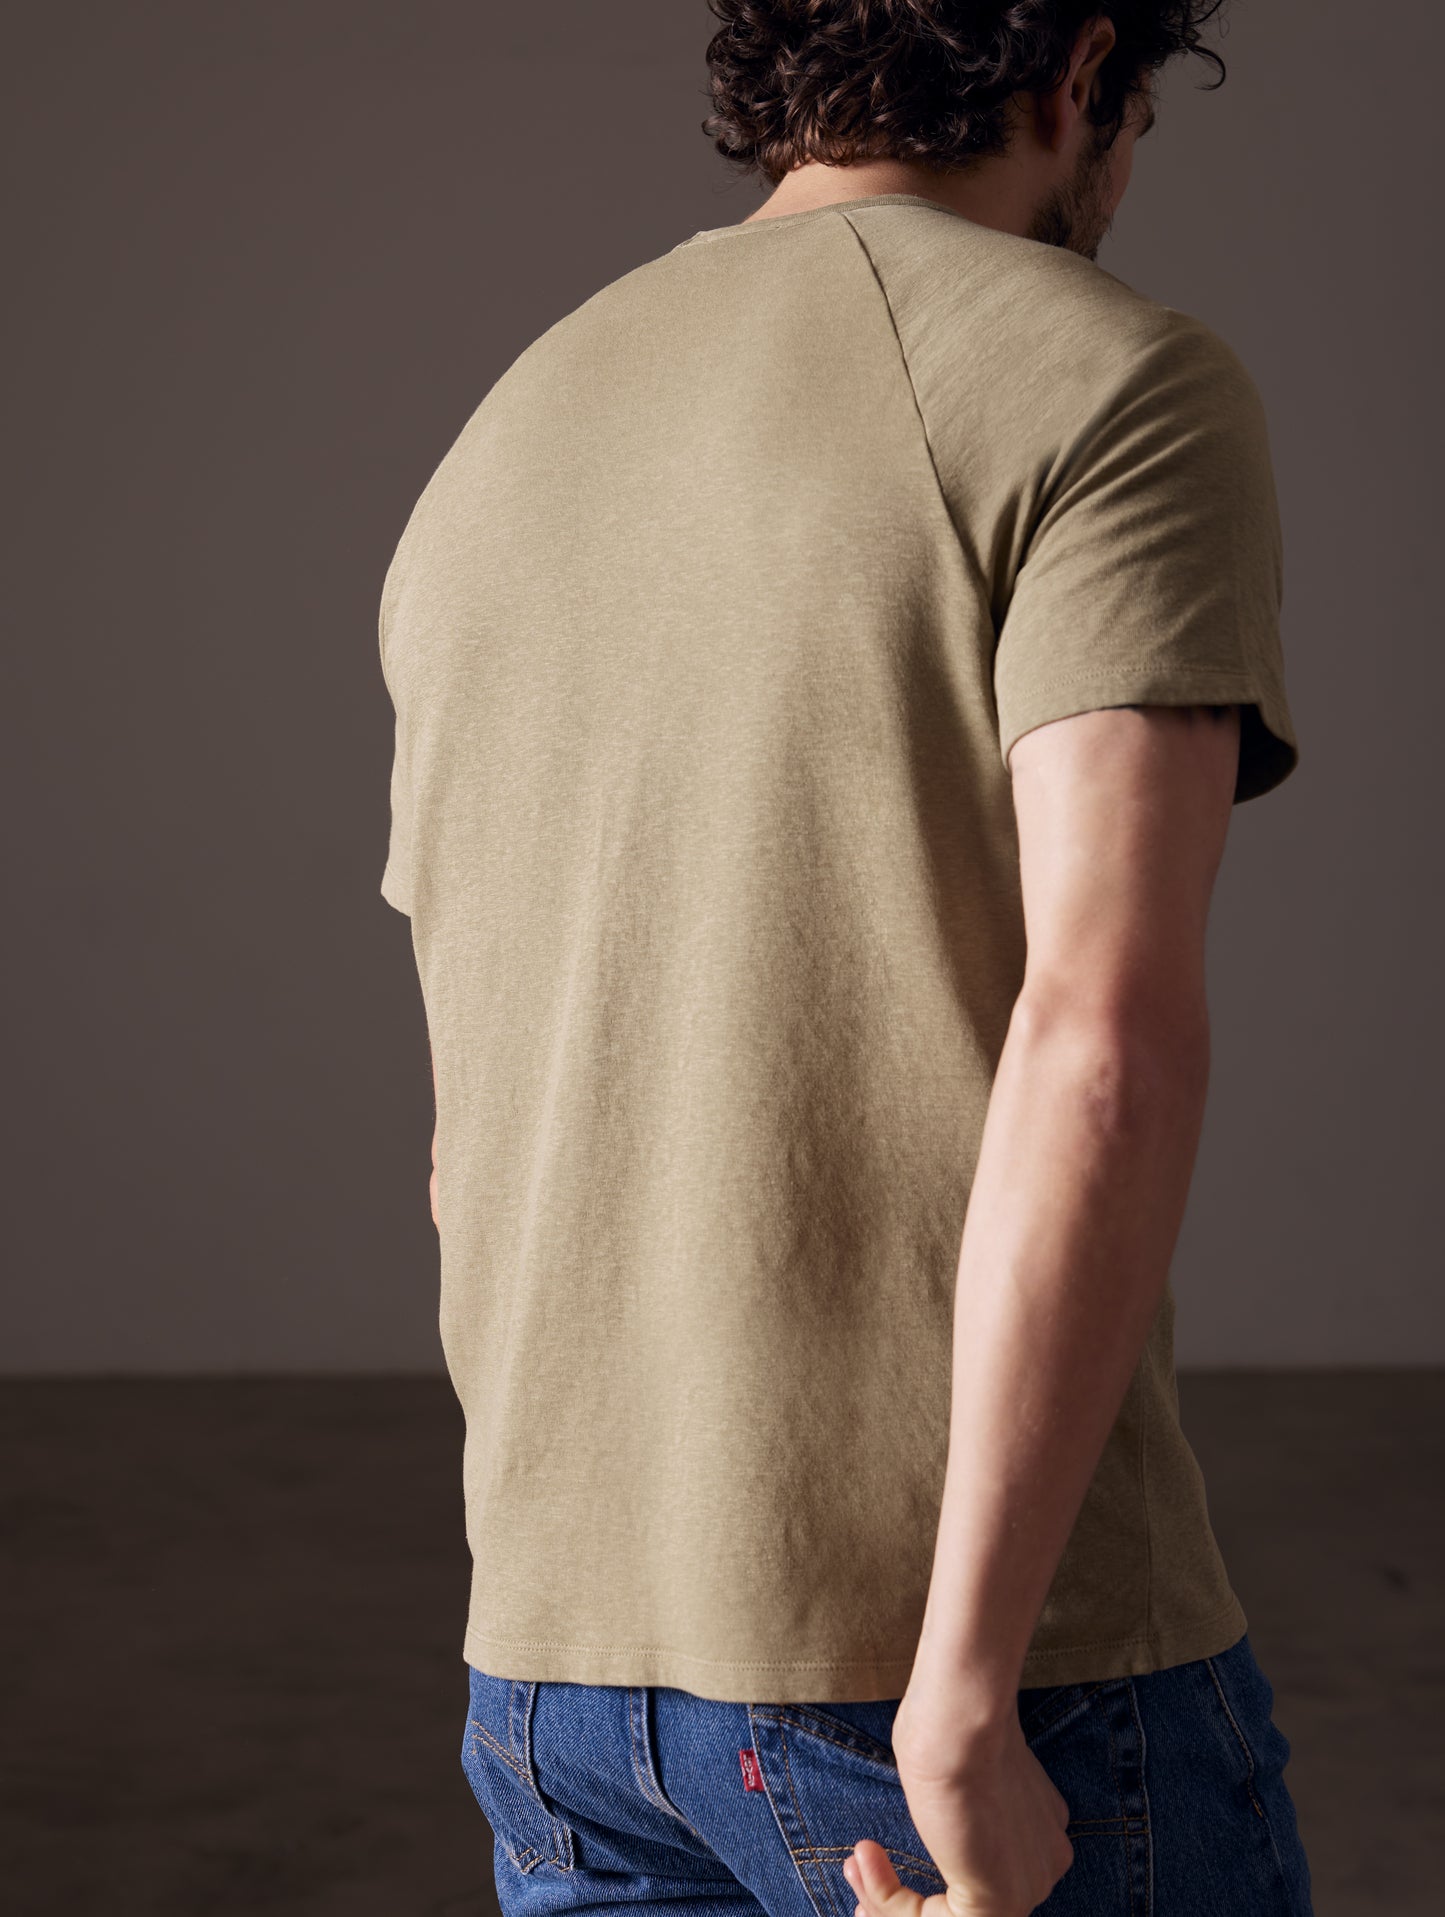 back view of man wearing green cotton tee